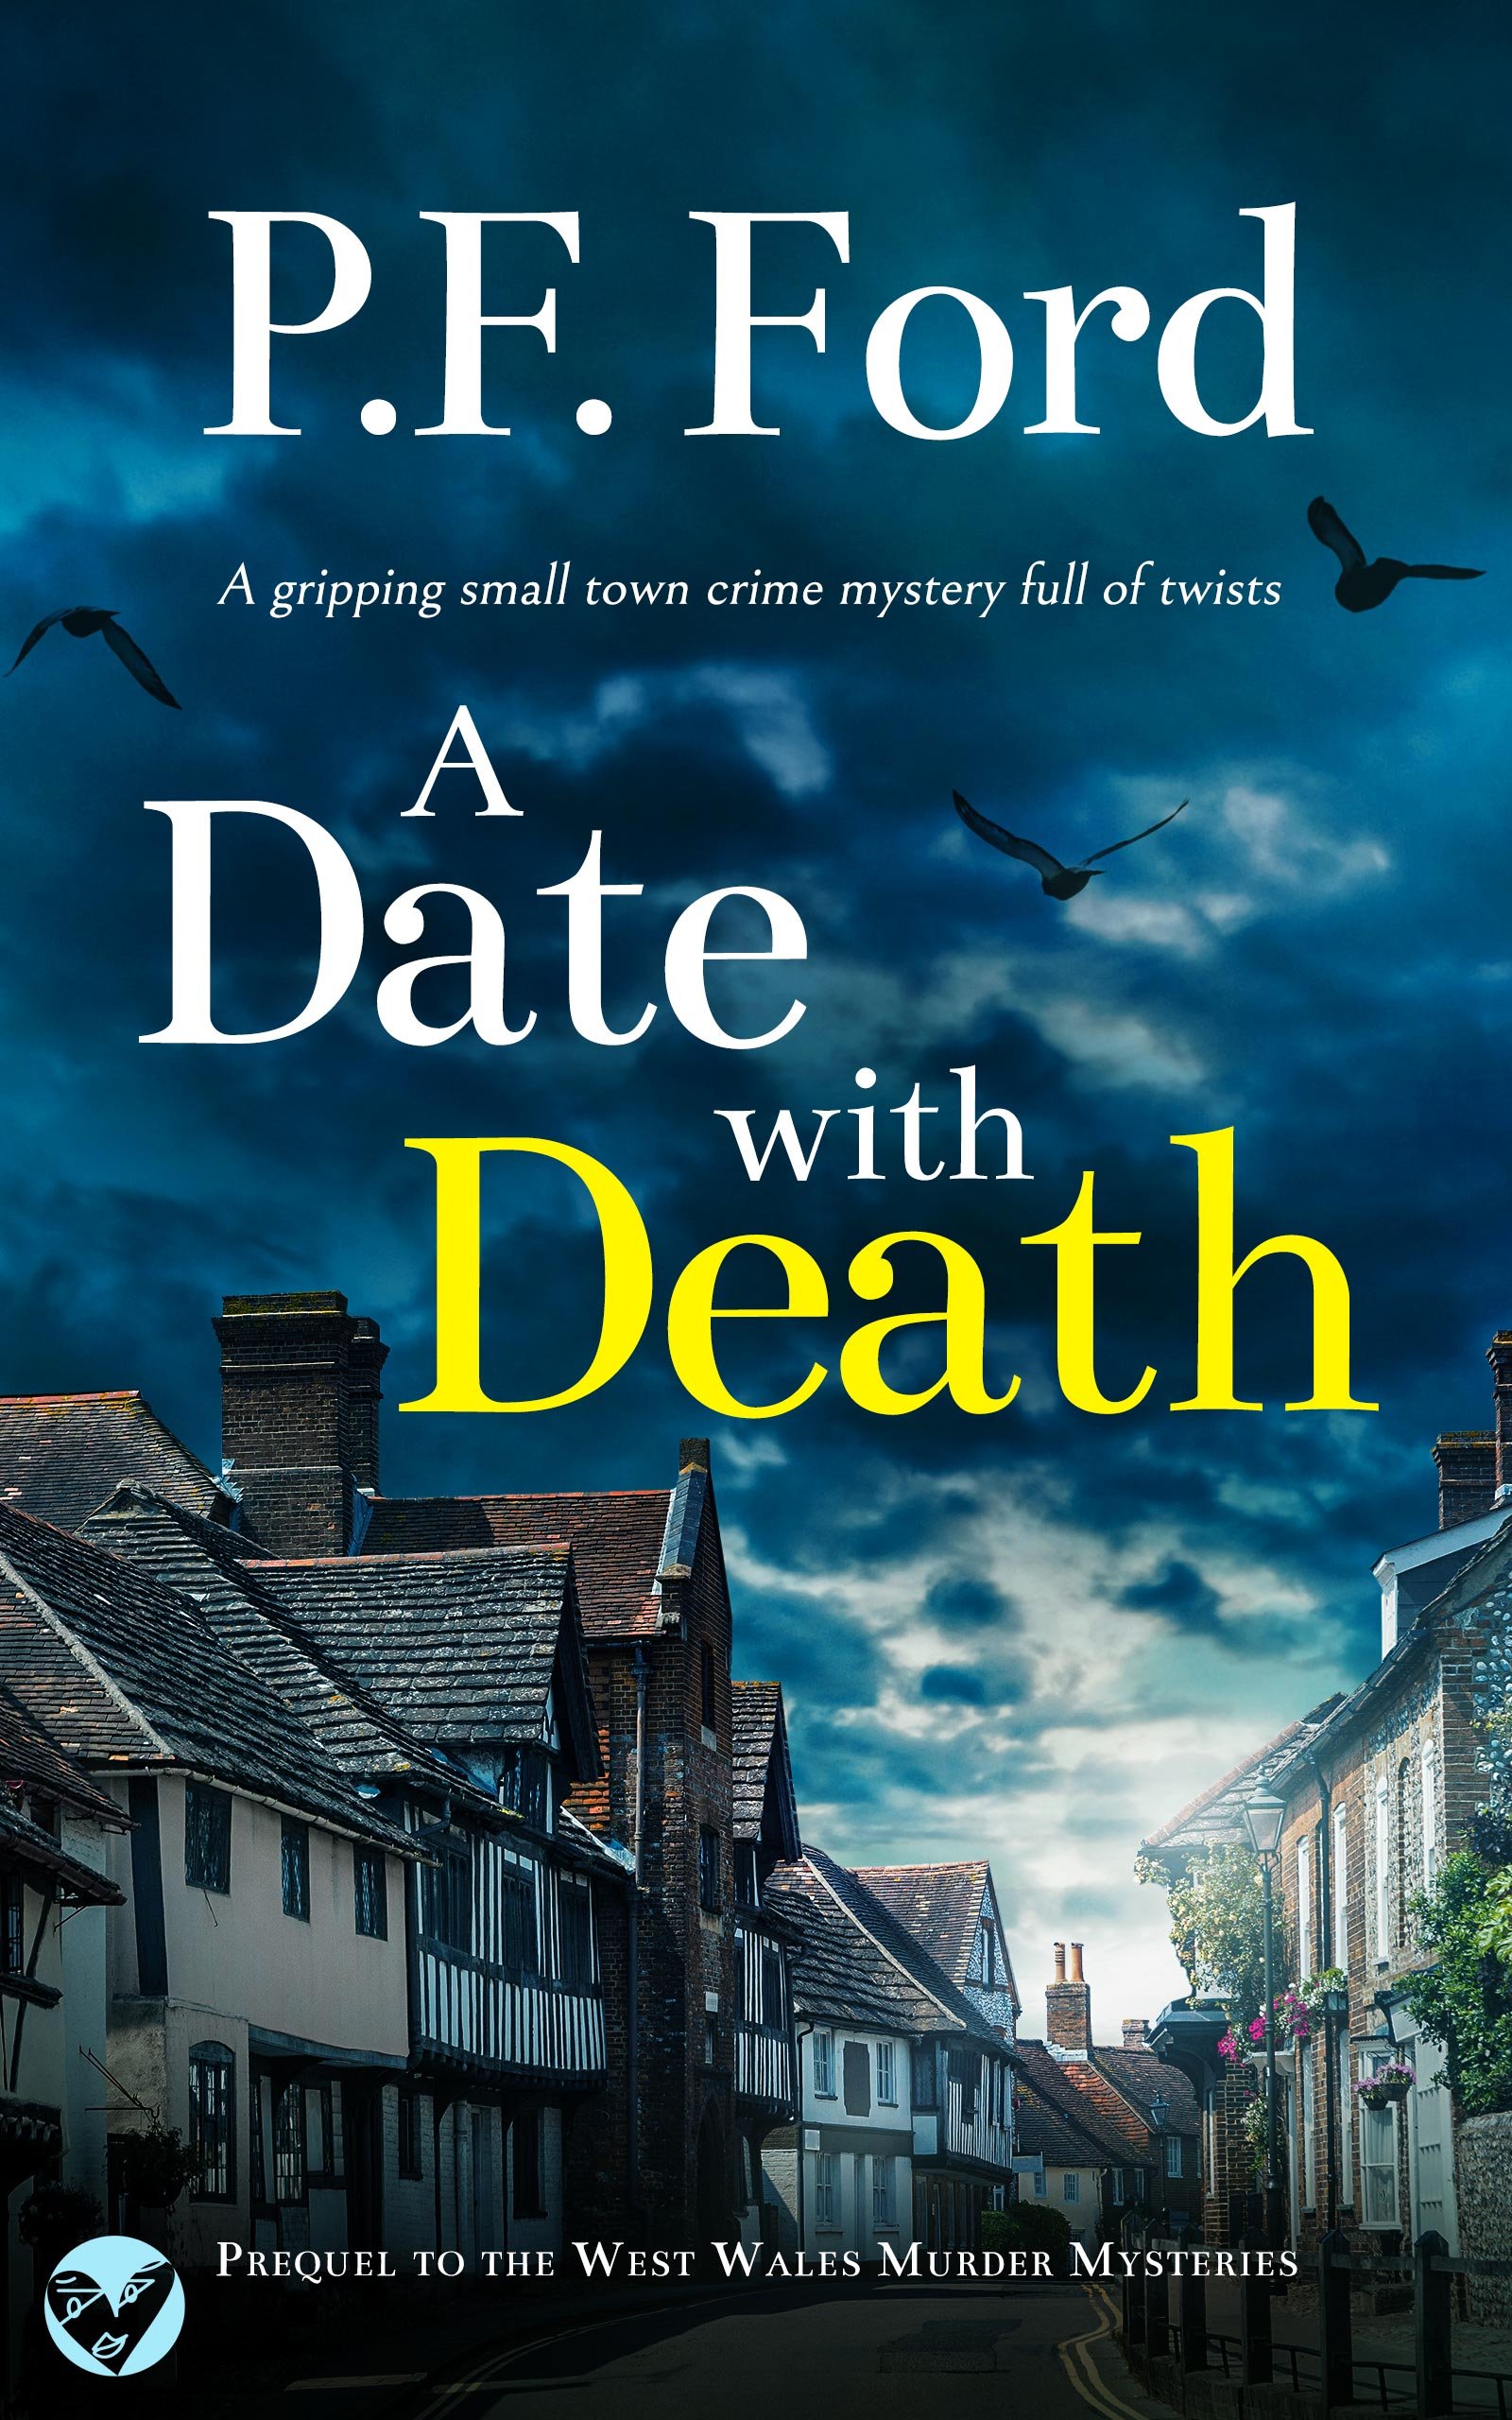 A DATE WITH DEATH 553K cover publish.jpg